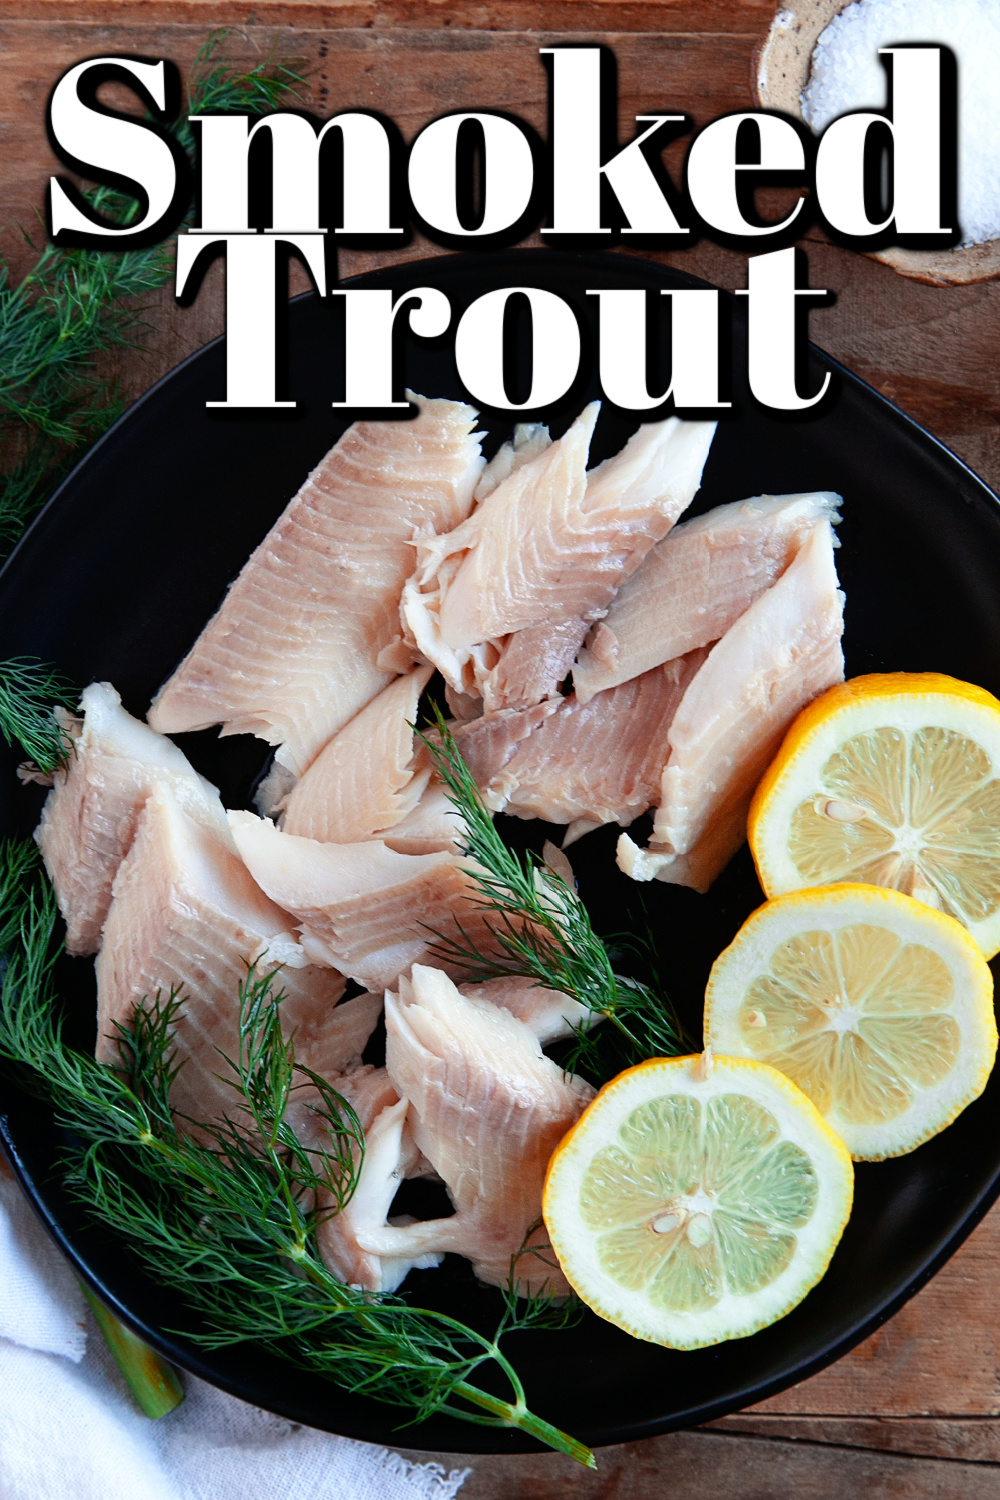 This smoked trout recipe is so amazingly too simple to prepare yet so incredibly flavorful. I know you are going to love it! 